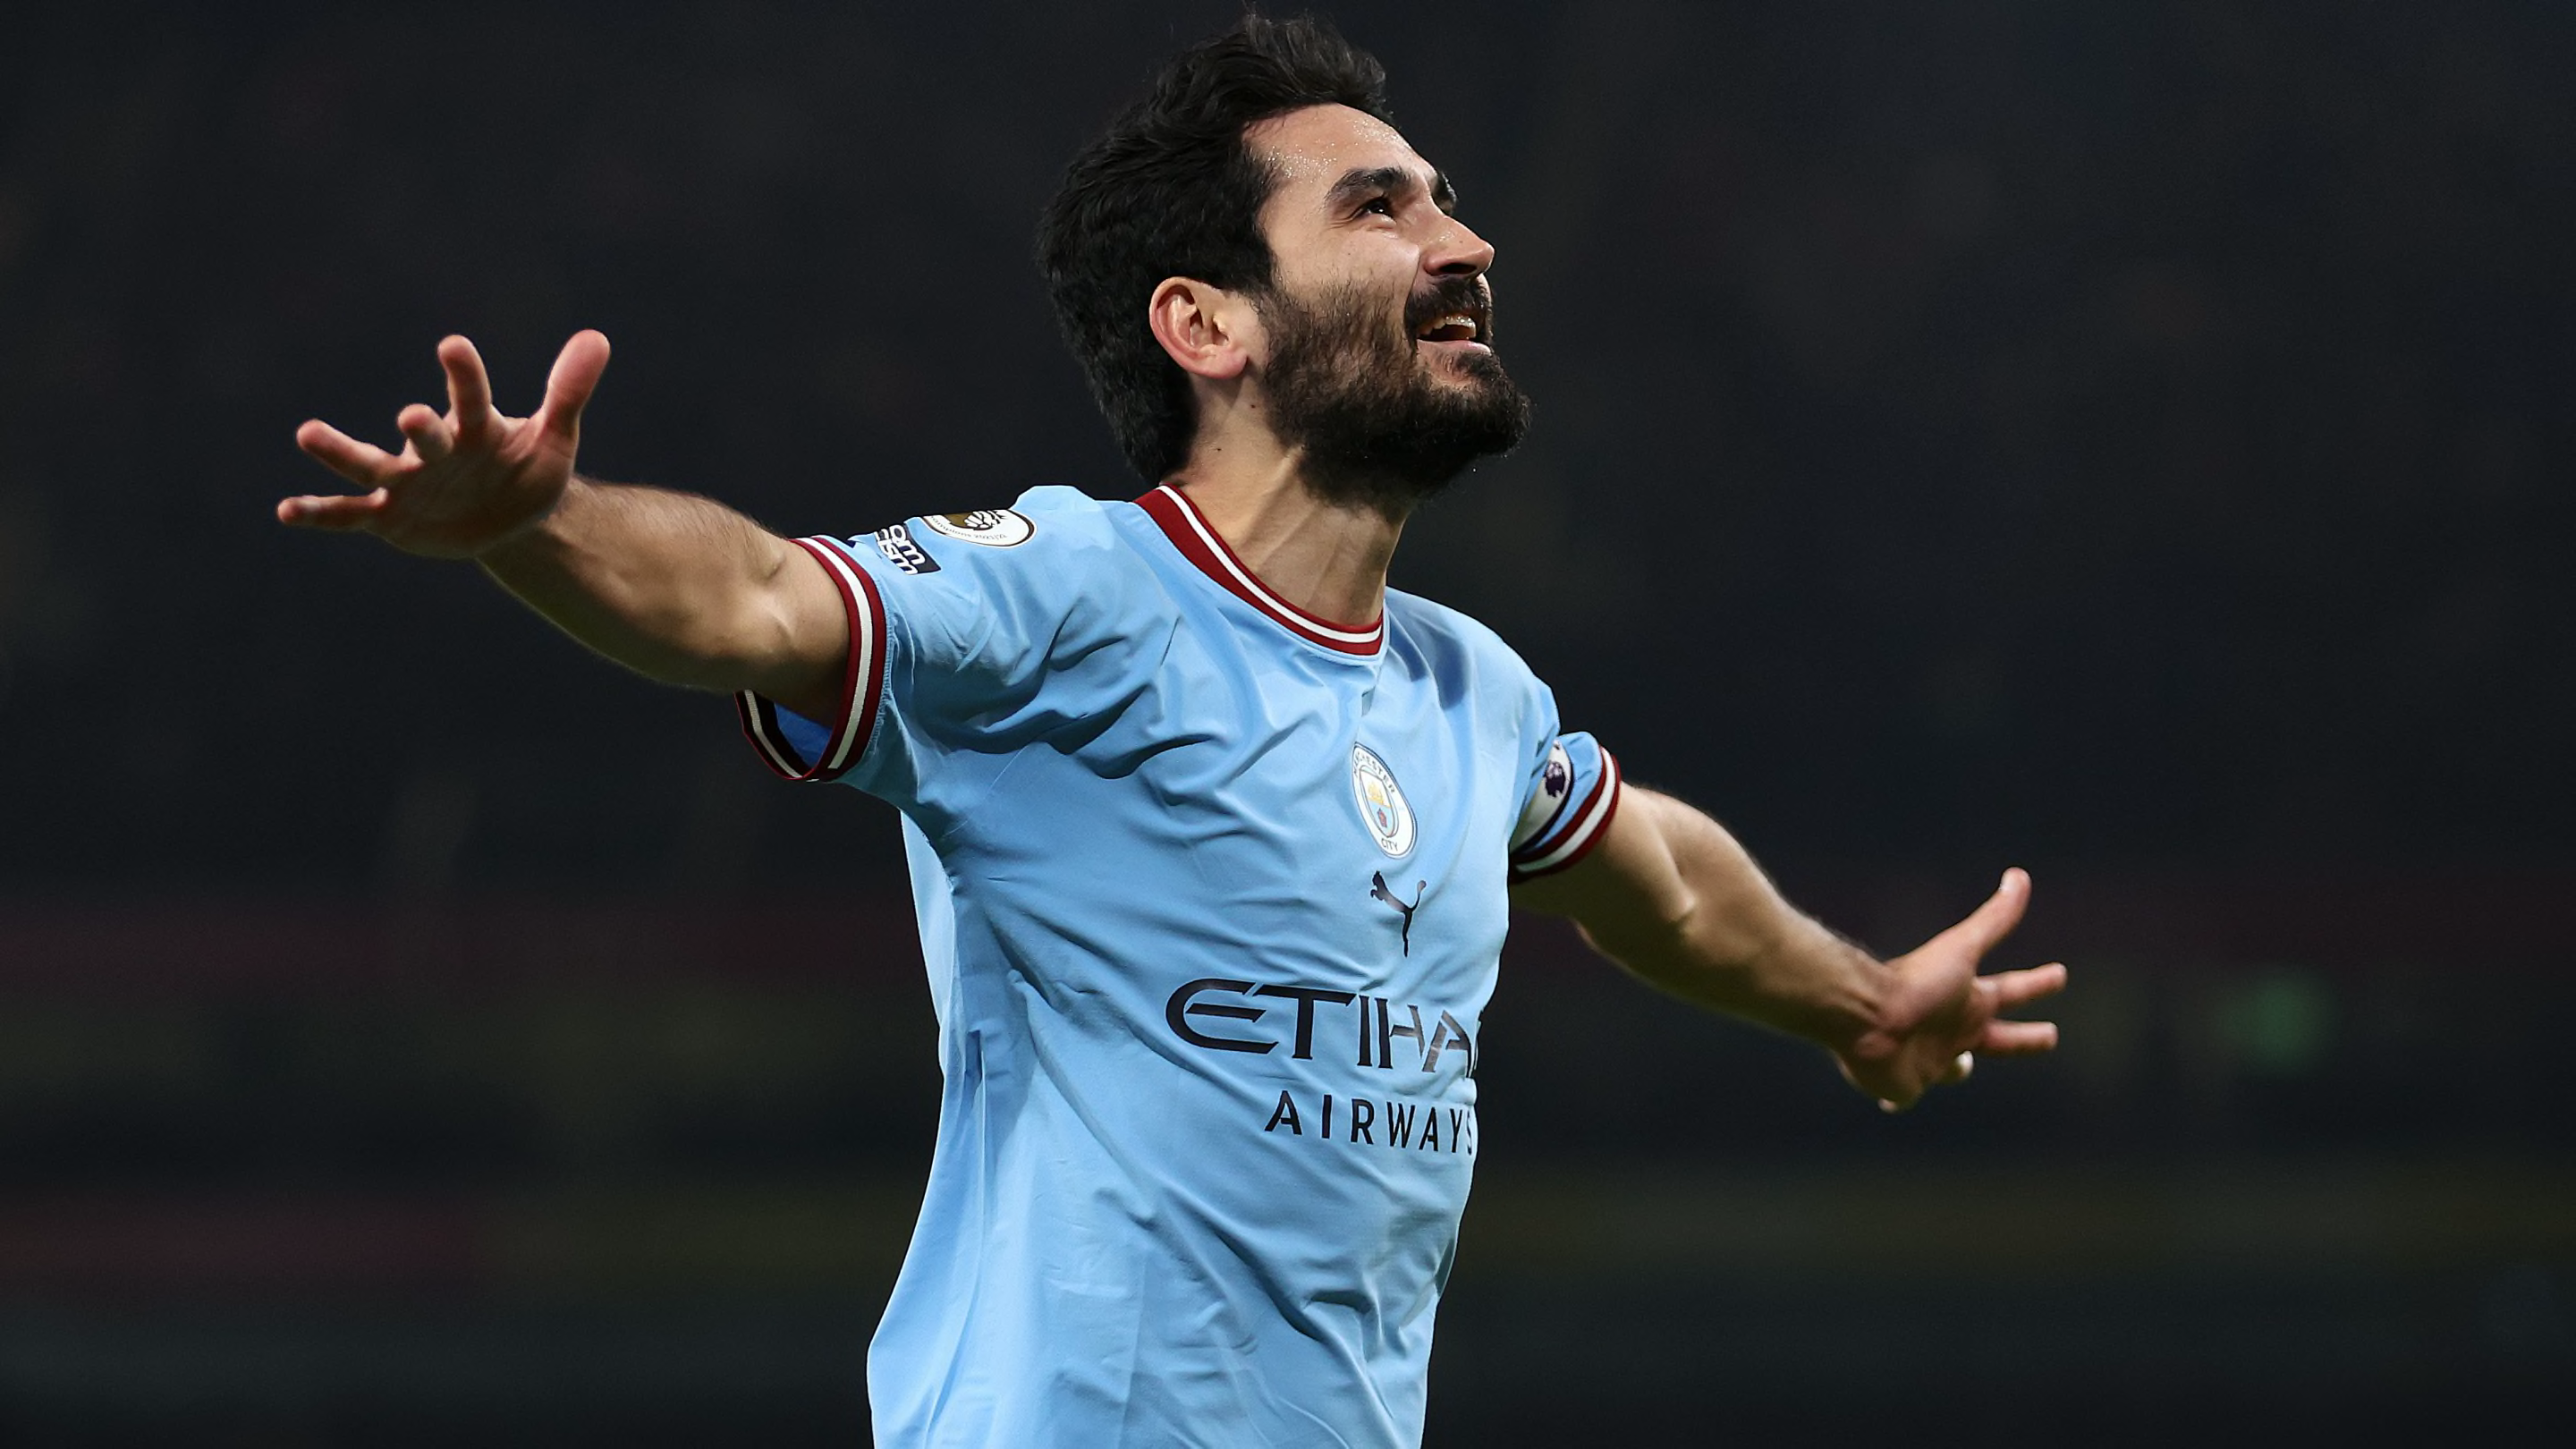 Pep Guardiola confirms stance on Ilkay Gundogan contract talks after Barcelona agent meeting